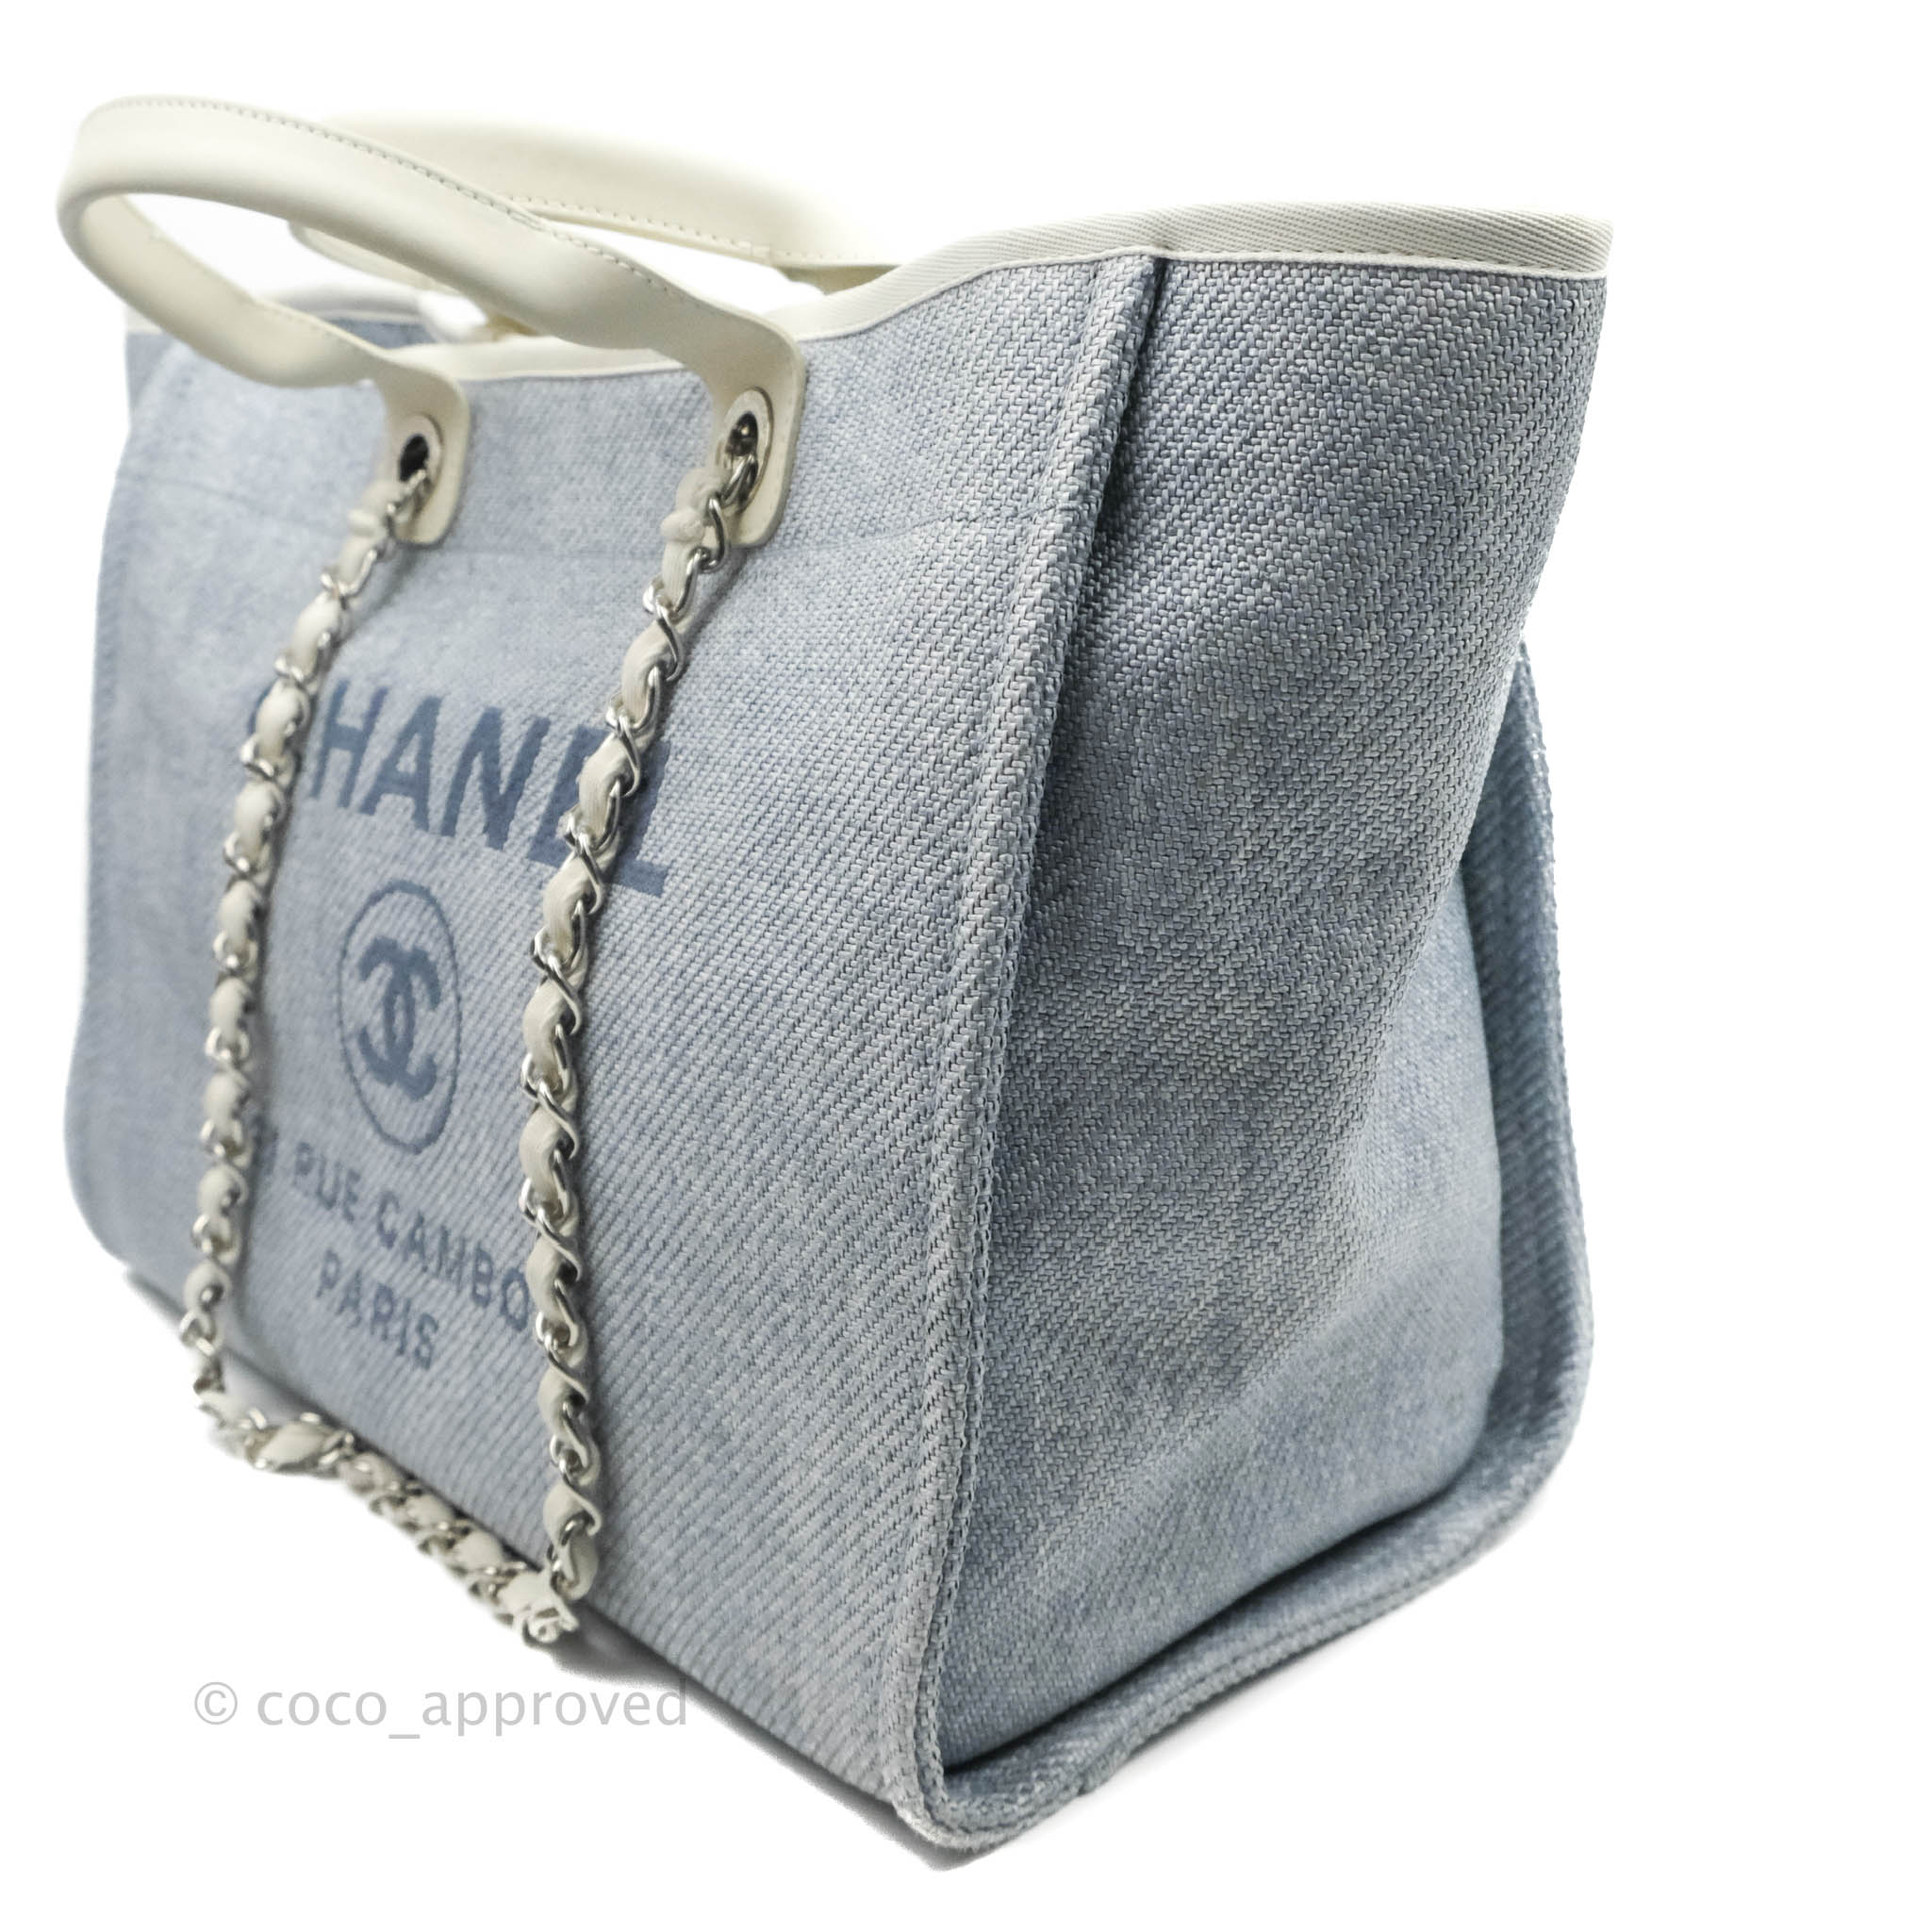 CHANEL Canvas Large Deauville Tote Blue 392328